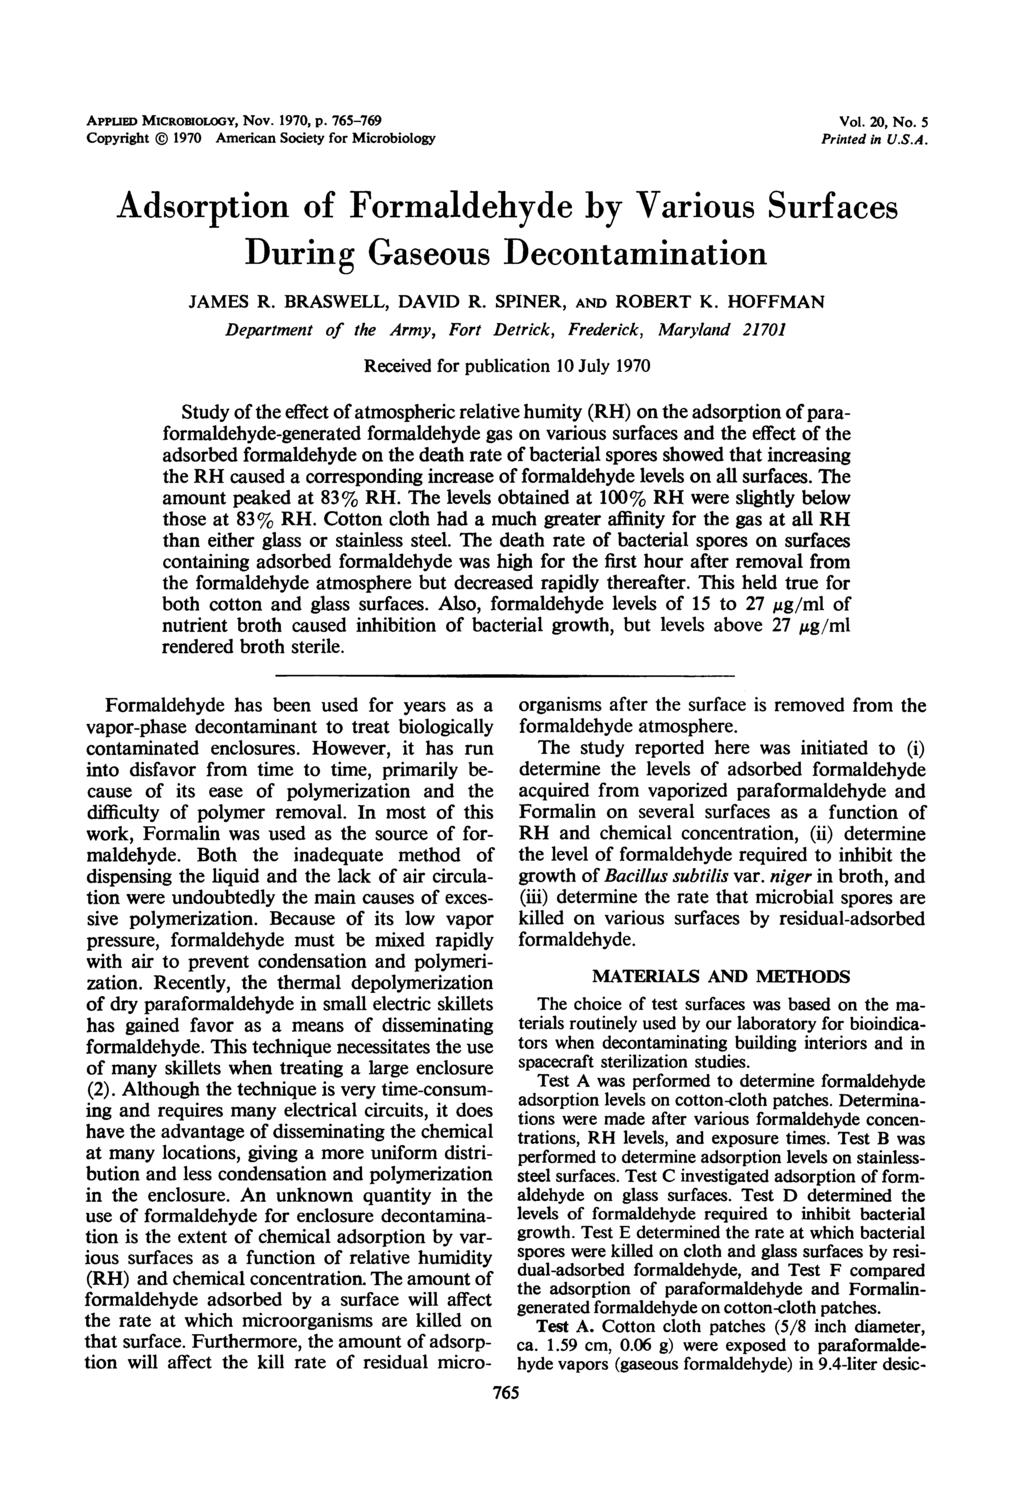 APPUED MCROBOLOGY, Nov. 197, p. 765-769 Copyright 197 American Society for Microbiology Vol. 2, No. 5 Printed in U.S.A. Adsorption of Formaldehyde by Various Surfaces During Gaseous Deconitamination JAMES R.